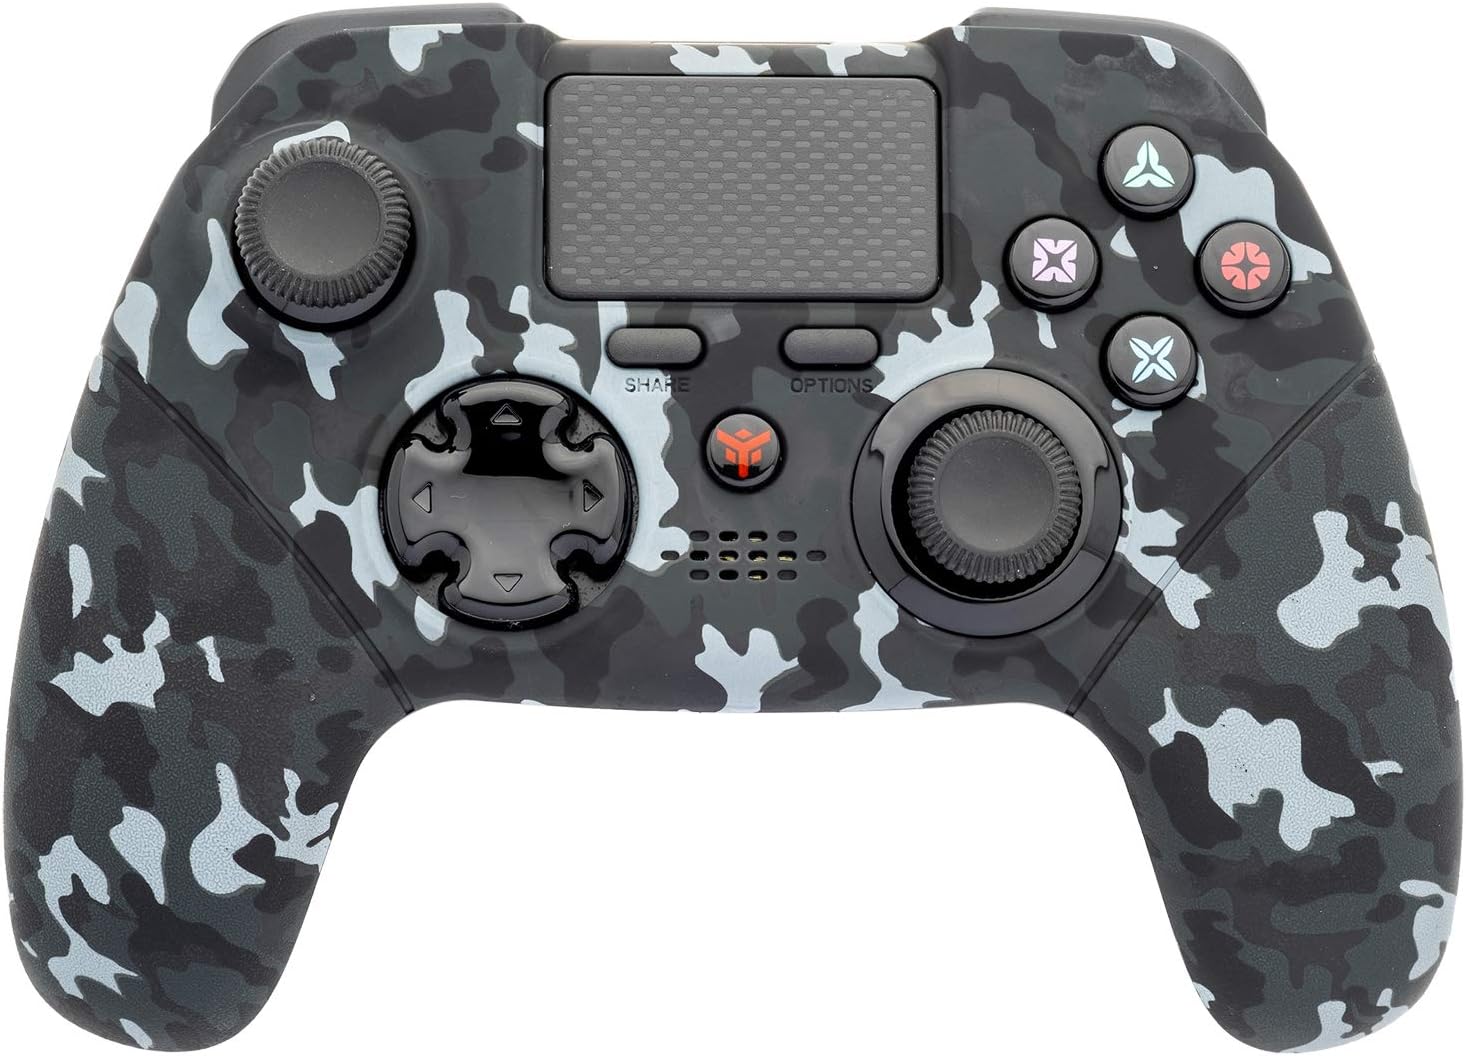 GAMEPAD CONTROLLER PC, PS4, Bluetooth, DualShock, Progr Keys, TouchPad Axis6, CAMO 